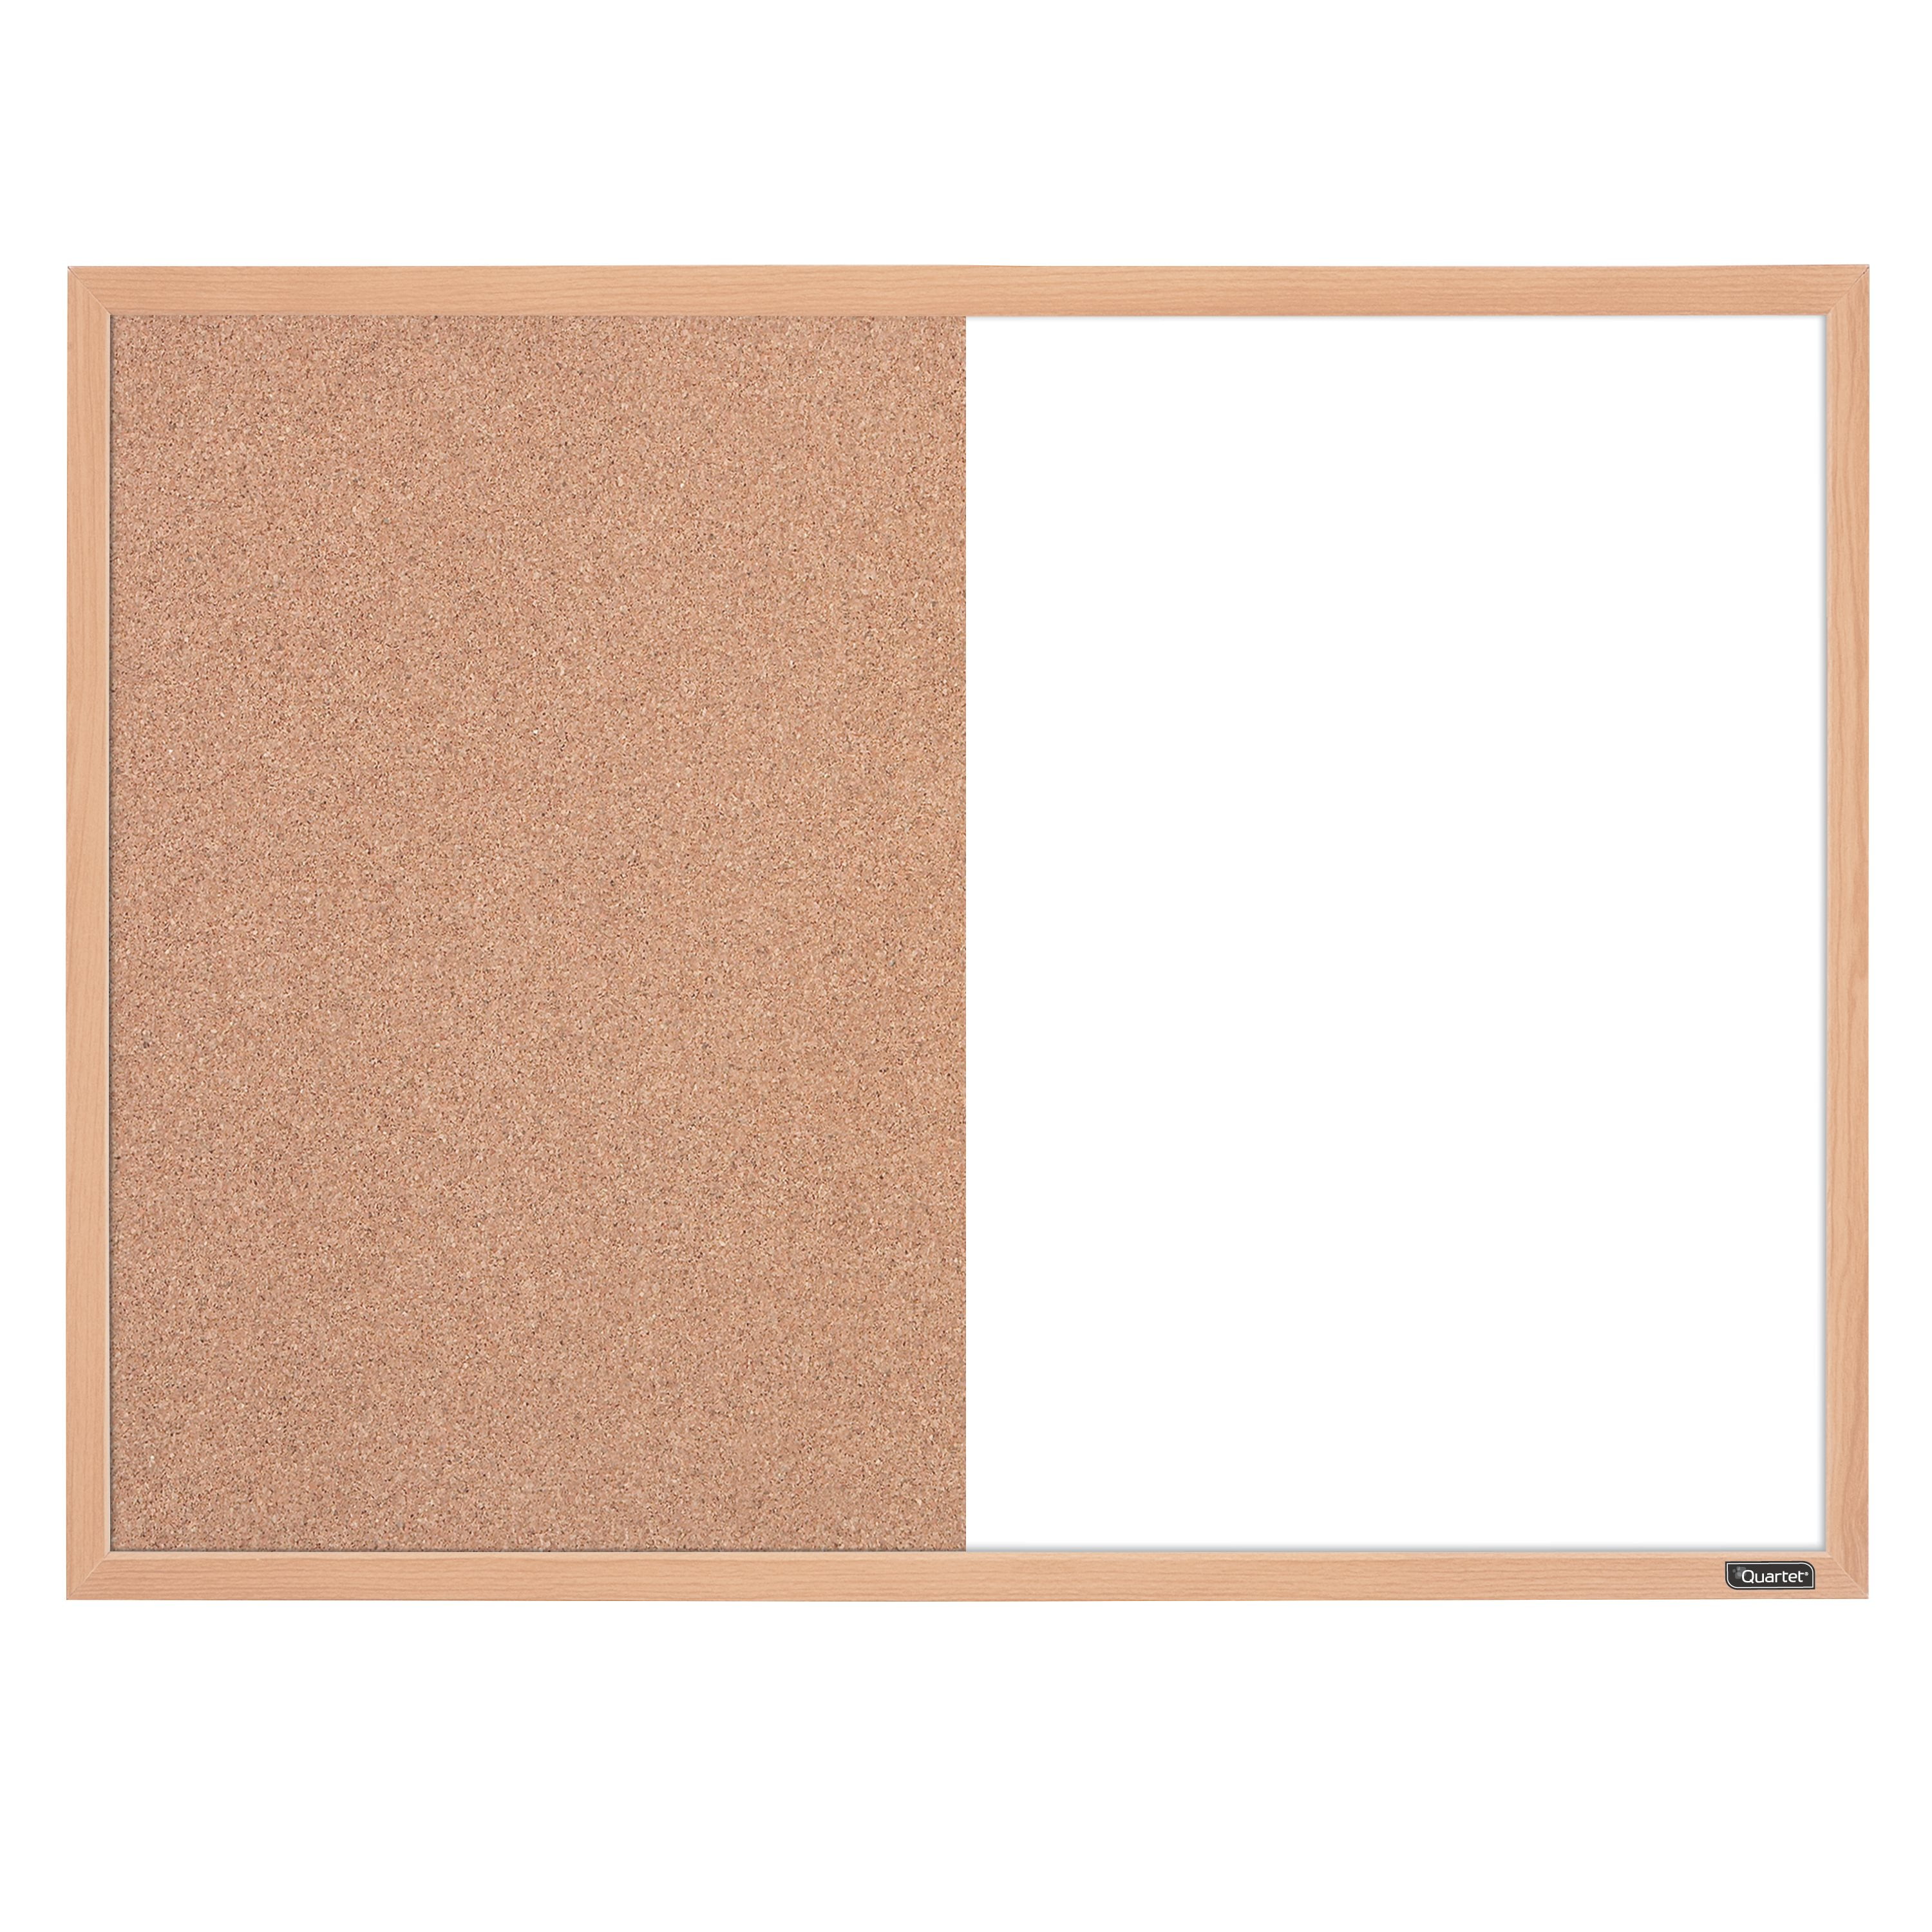 Home School Message Board, White Curved Frame Combination Magnetic Whiteboard and Corkboard White Board Perfect for Office and Home Decor 17 x 23 Inches 